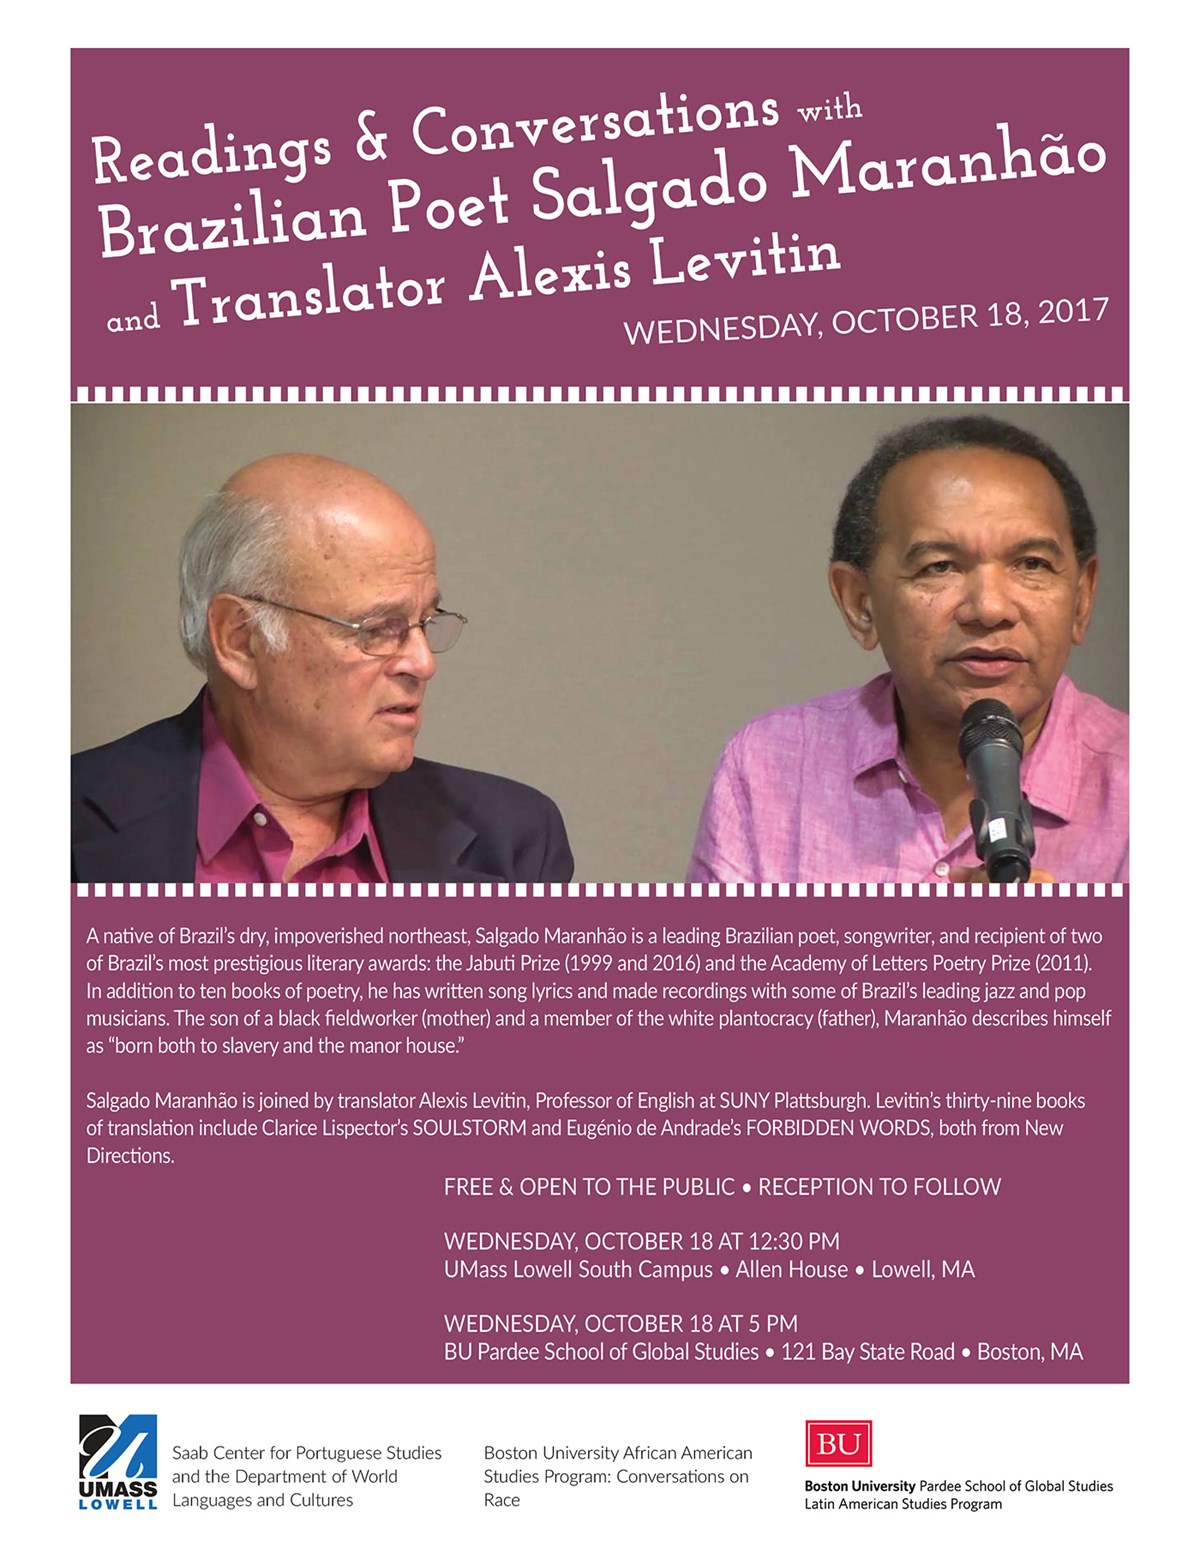 Flyer for event: Reading & Conversations with Brazilian Poet Salgado Maranhão and Translator Alexis Levitin. Salgado Maranhão is the best known poet of his generation in Brazil. Alexis Levitin has translated forty books, including Clarice Lispector’s Soulstorm and Eugenio de Andrade’s Forbidden Words (both from New Directions). 